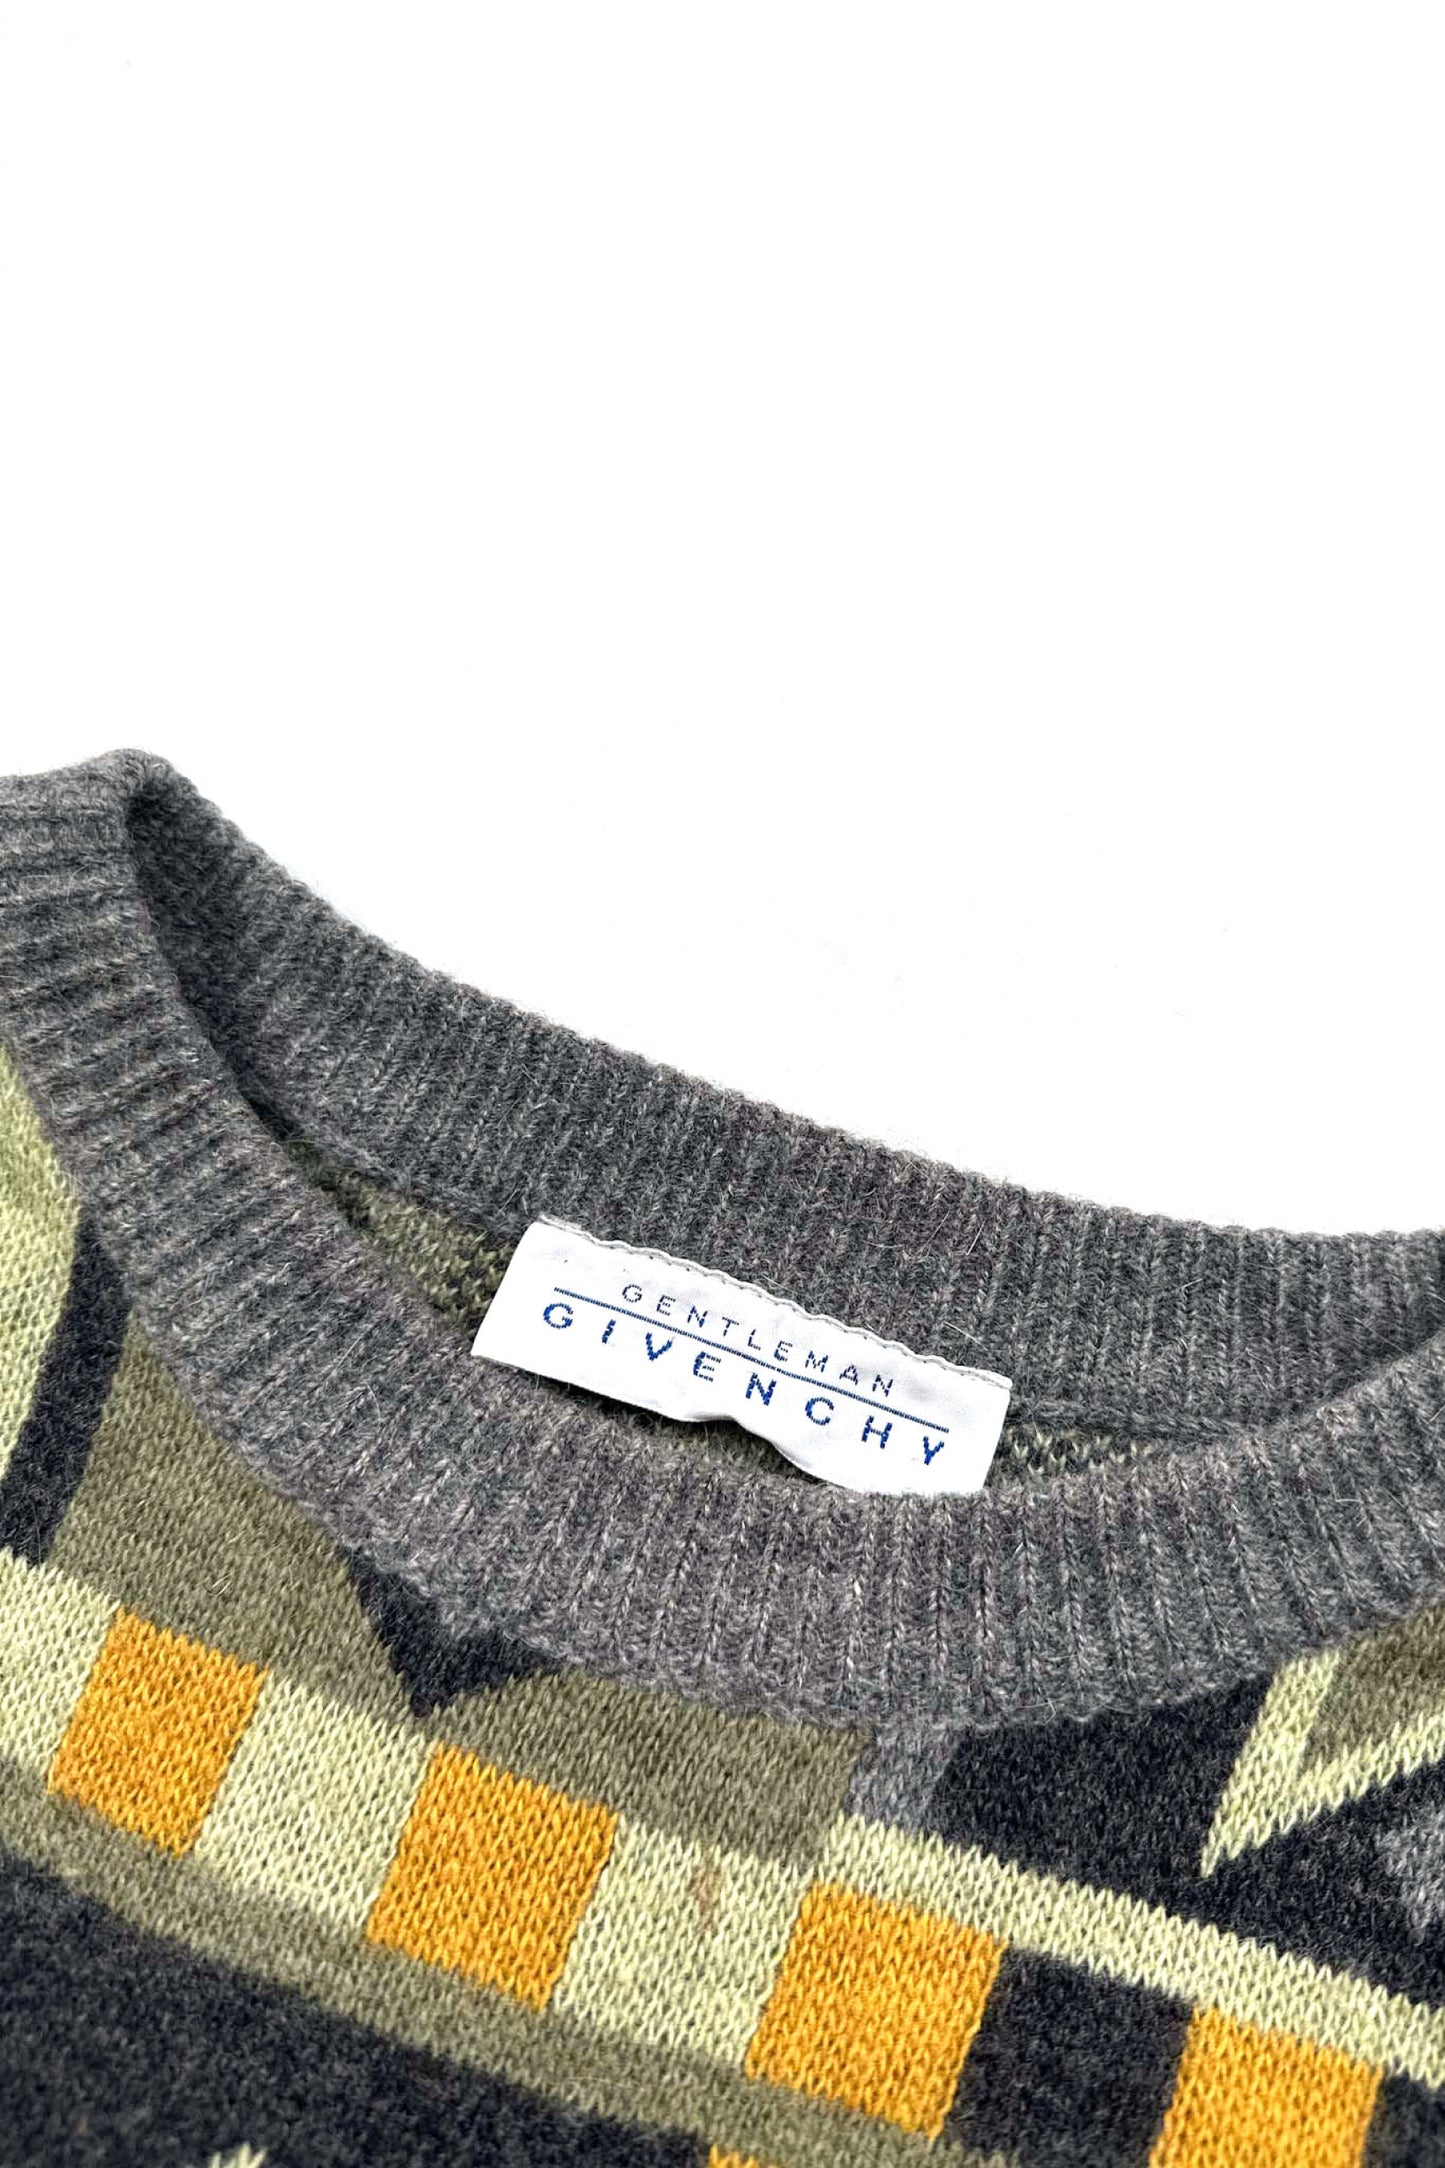 90's Made in ITALY pattern sweater